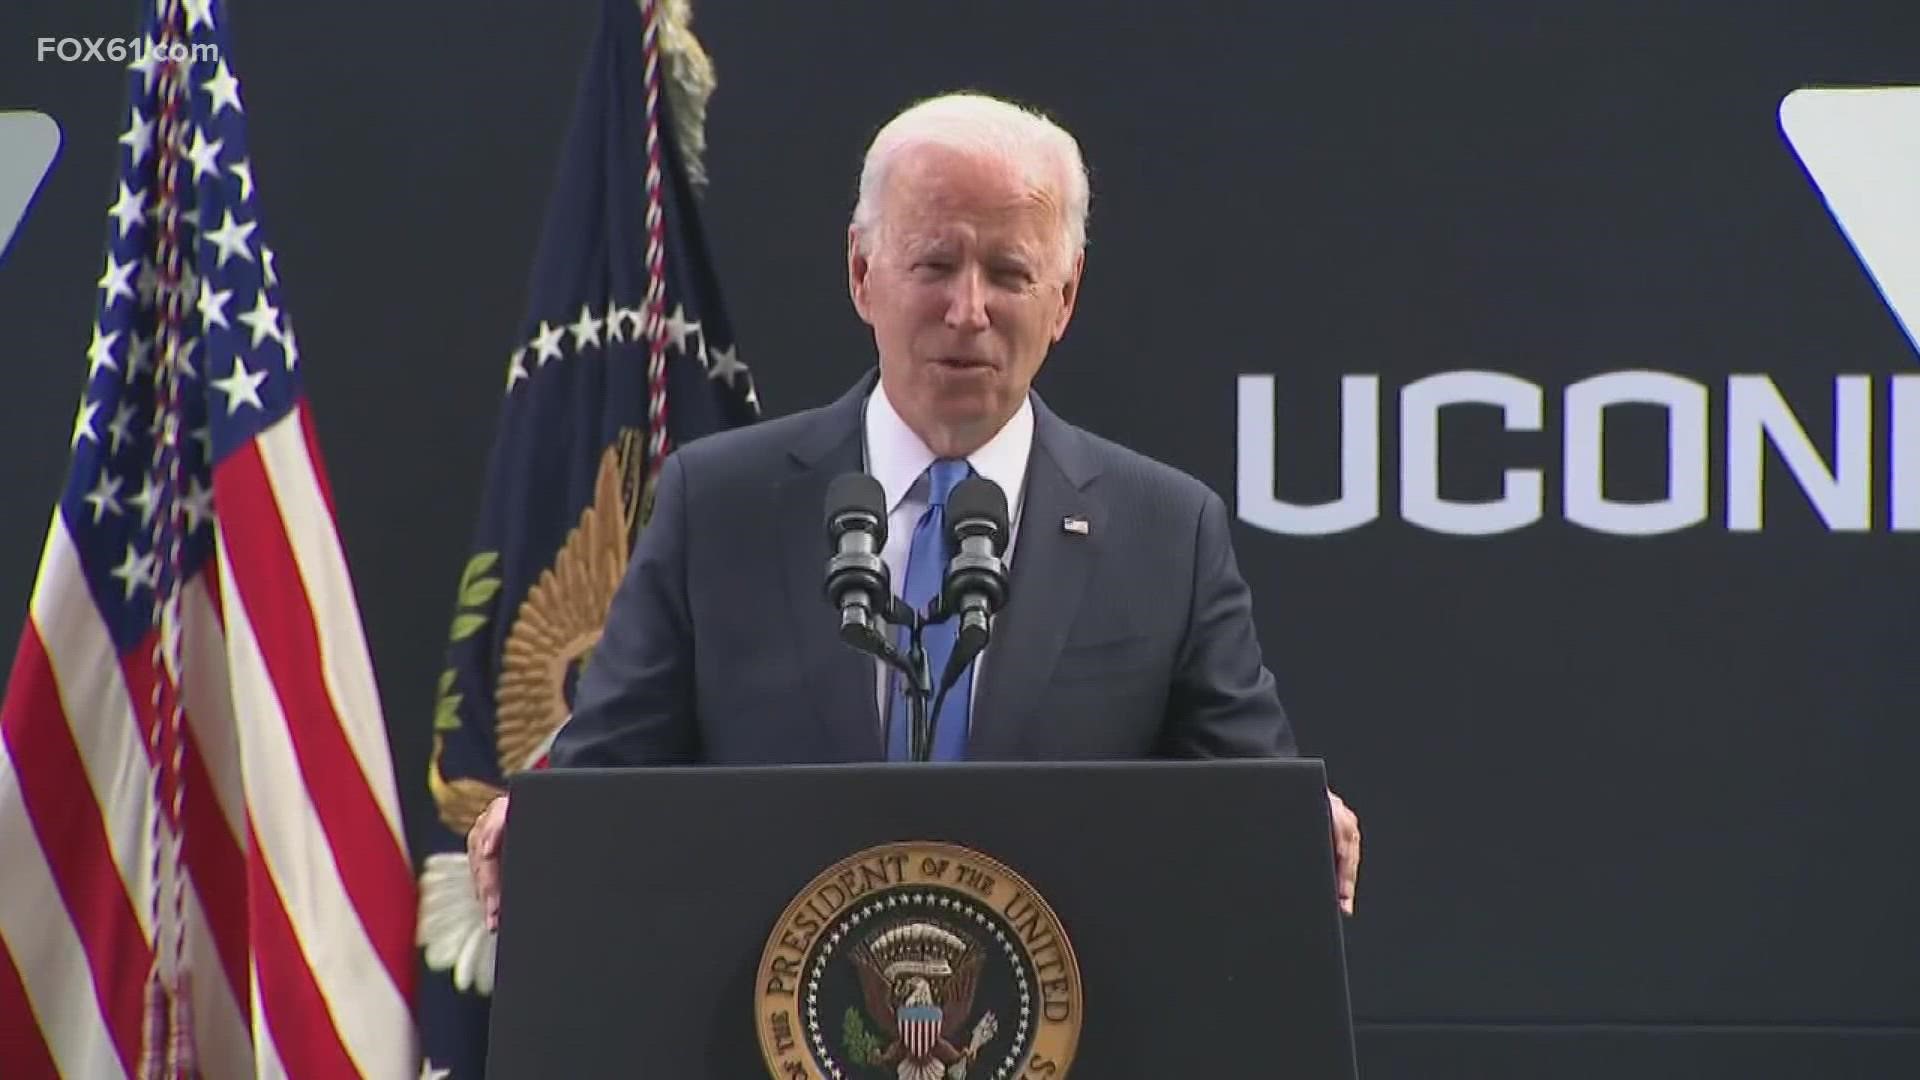 Biden spoke at the rededication of the Dodd Center for Human Rights at the Storrs campus.